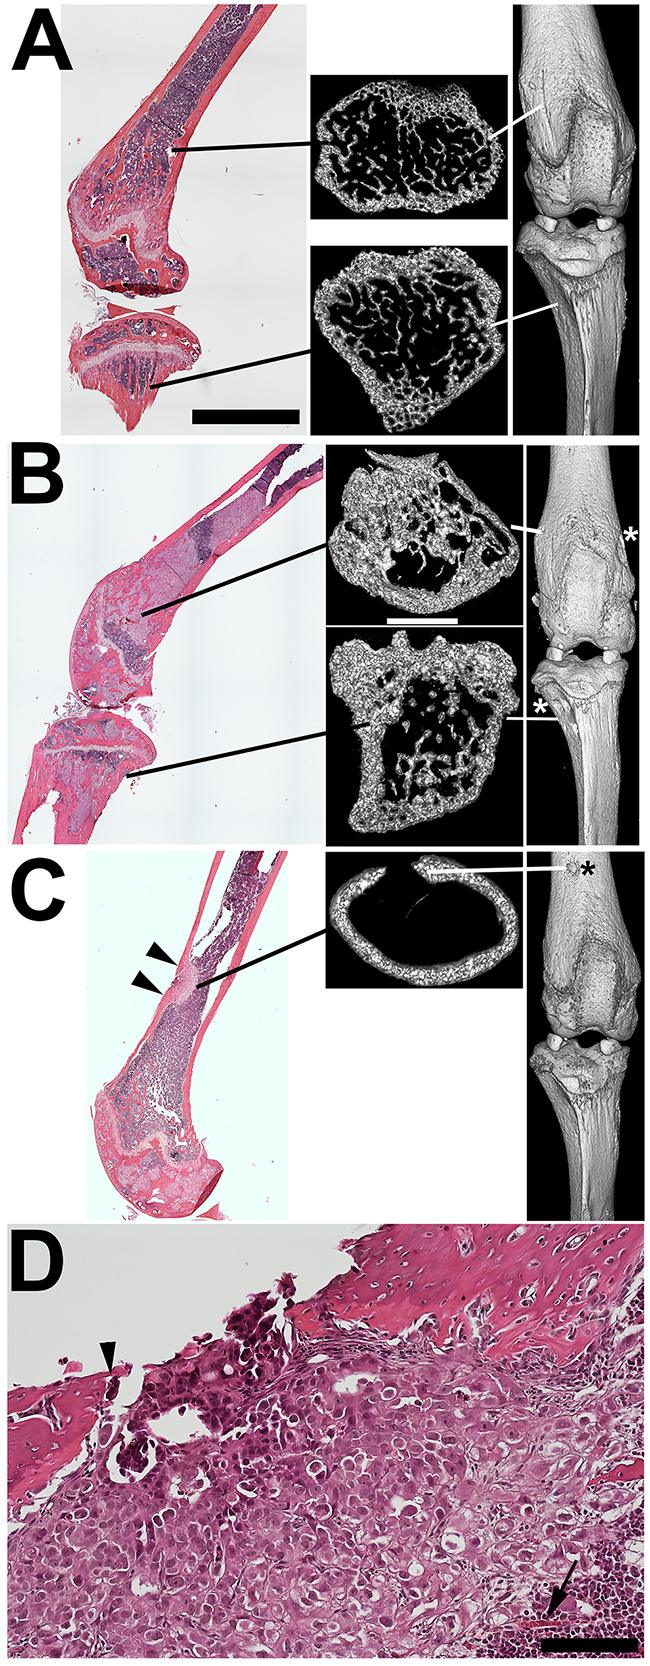 MicroCT reveals both bone remodeling consistent with metastatic tumor-mediated new bone formation and focal osteolysis.